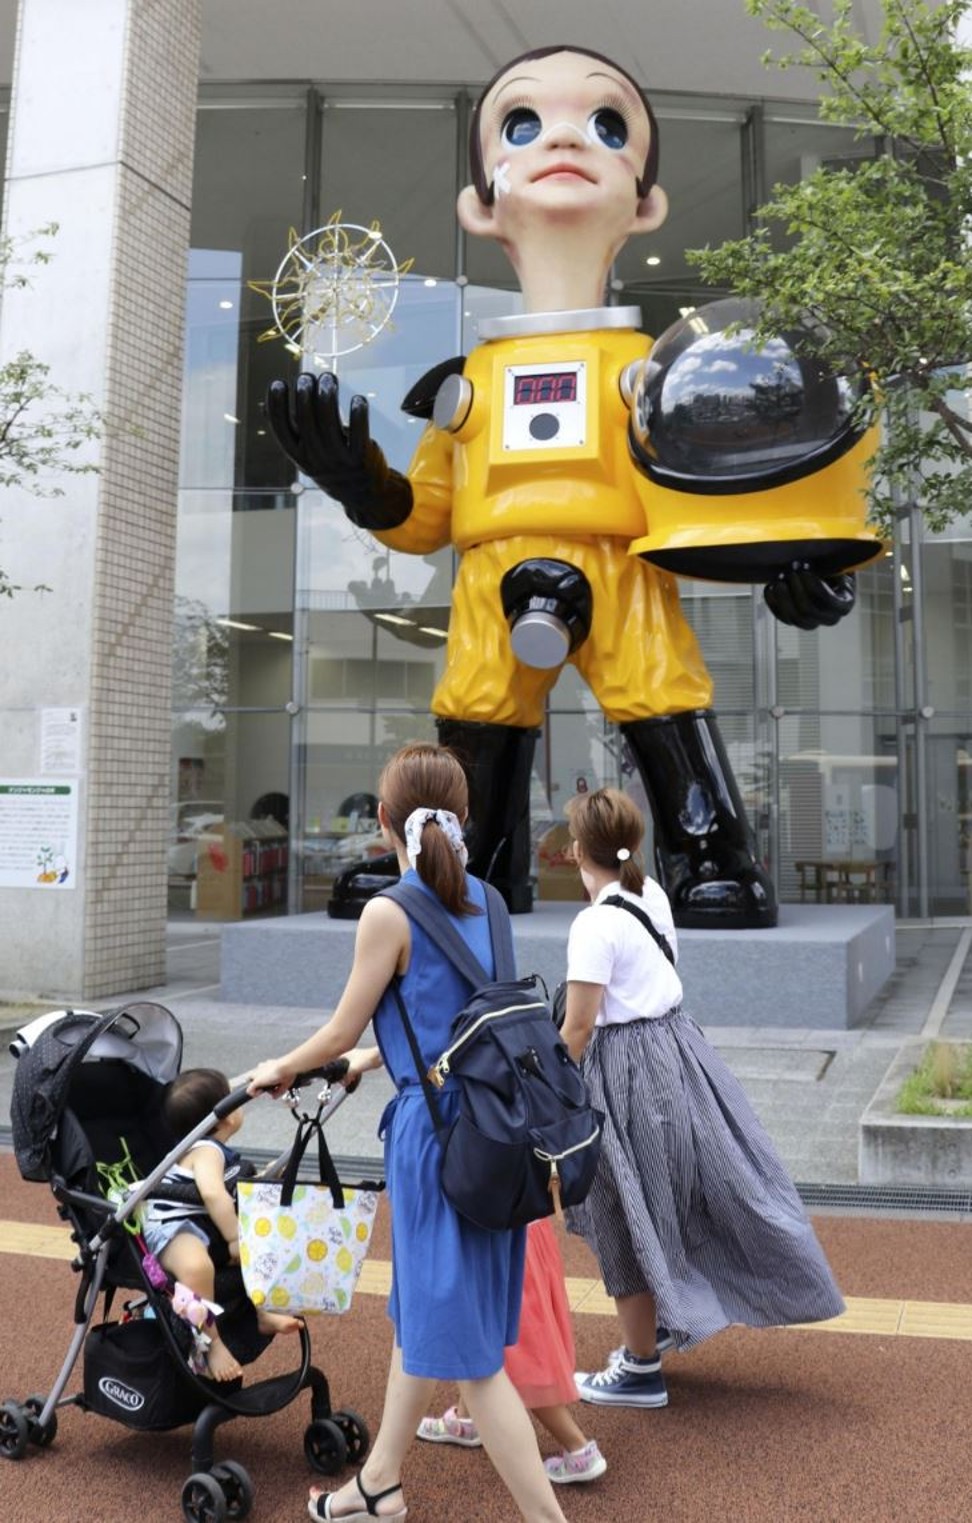 The 6.2-metre statue called Sun Child was made by contemporary artist Kenji Yanobe to express his wish for a world free from nuclear disasters. Photo: Kyodo